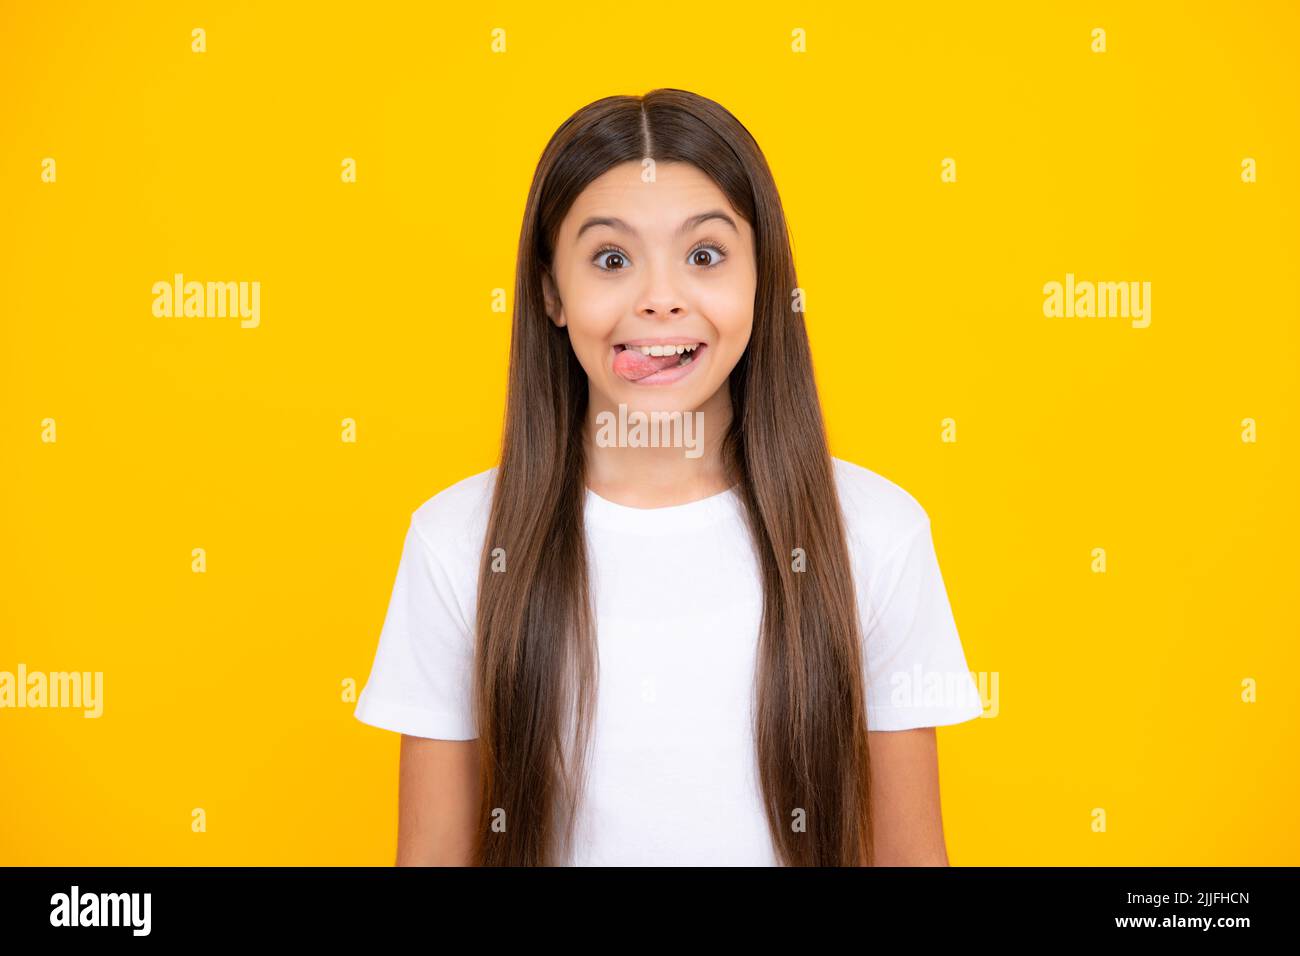 Funny kids face. Portrait of silly teenager child girl smiling and showing tongue in camera making funny faces. Stock Photo